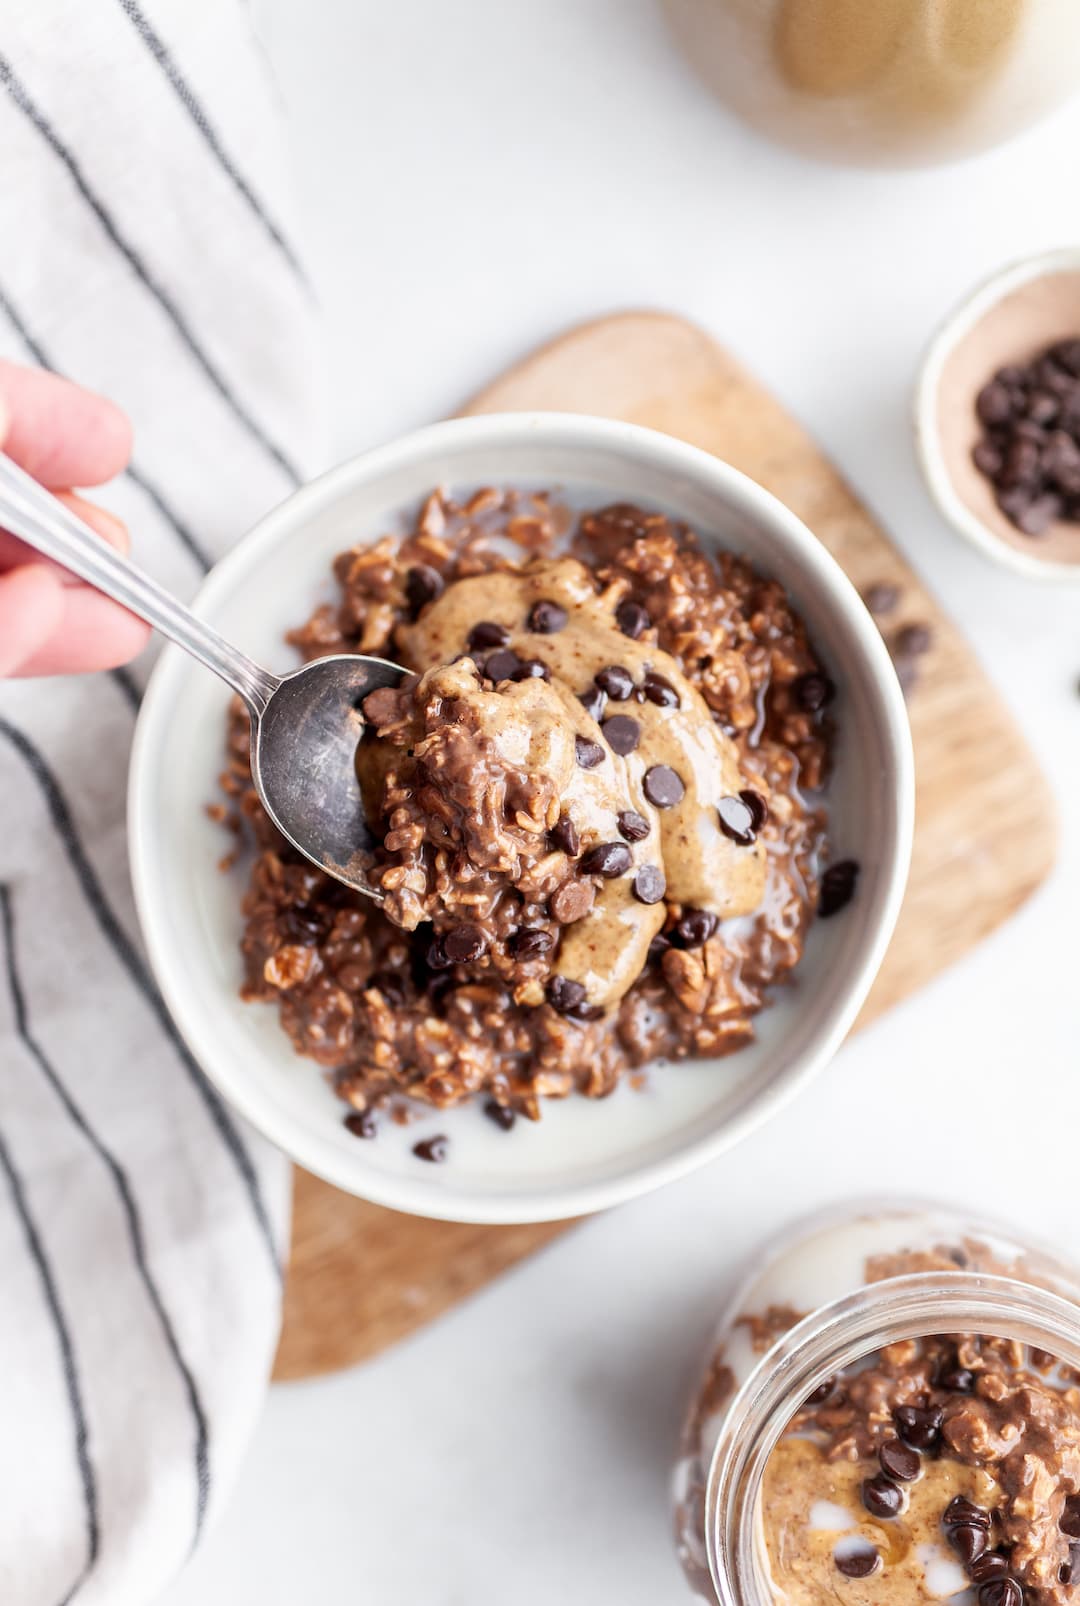 Spoon scooping a spoonful of Healthy Chocolate Overnight Oats